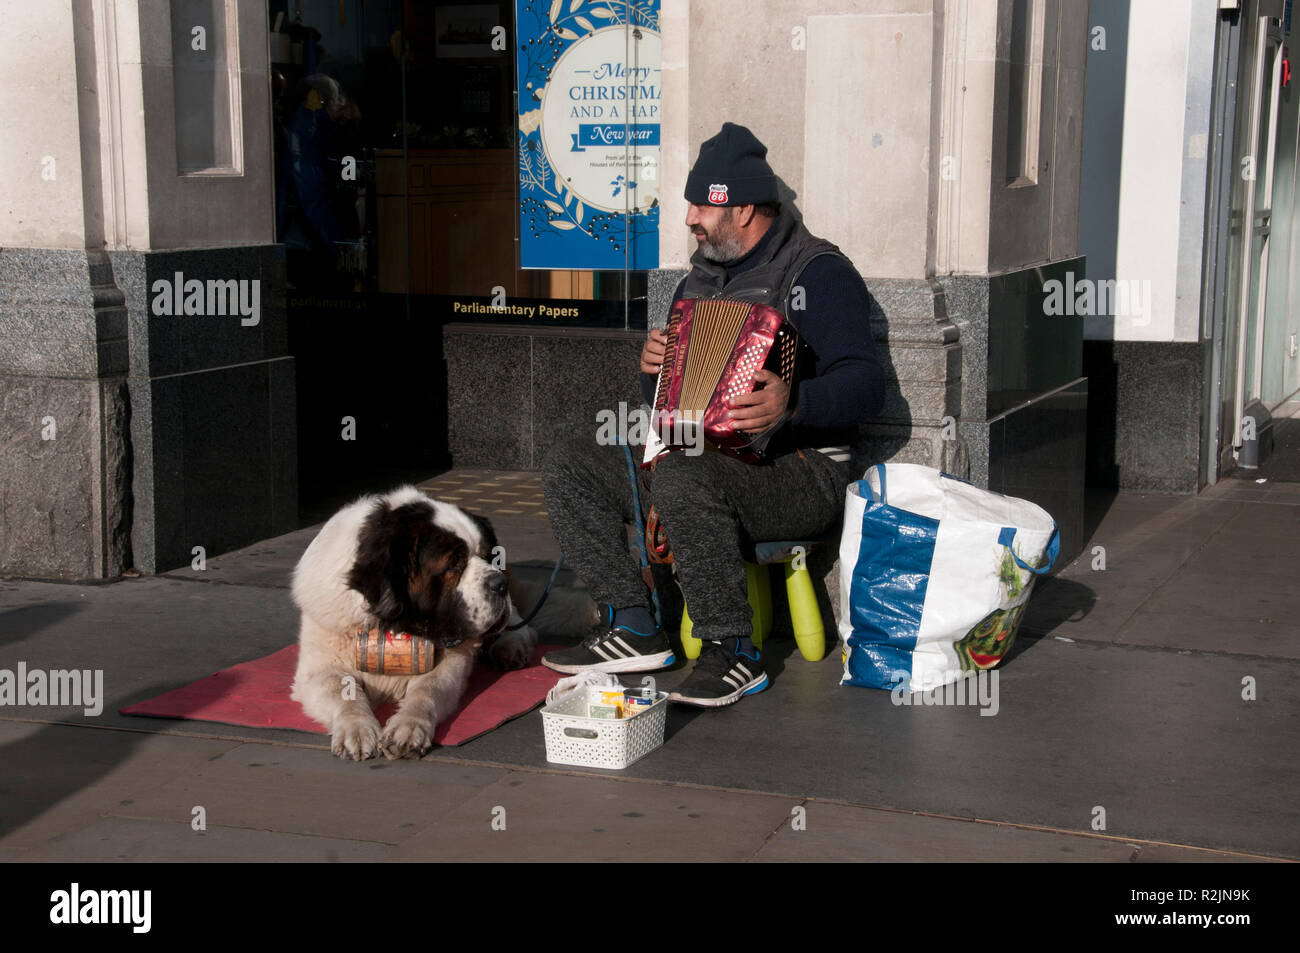 London, Westminster station. An accordion playing busker with St Bernard dog Stock Photo